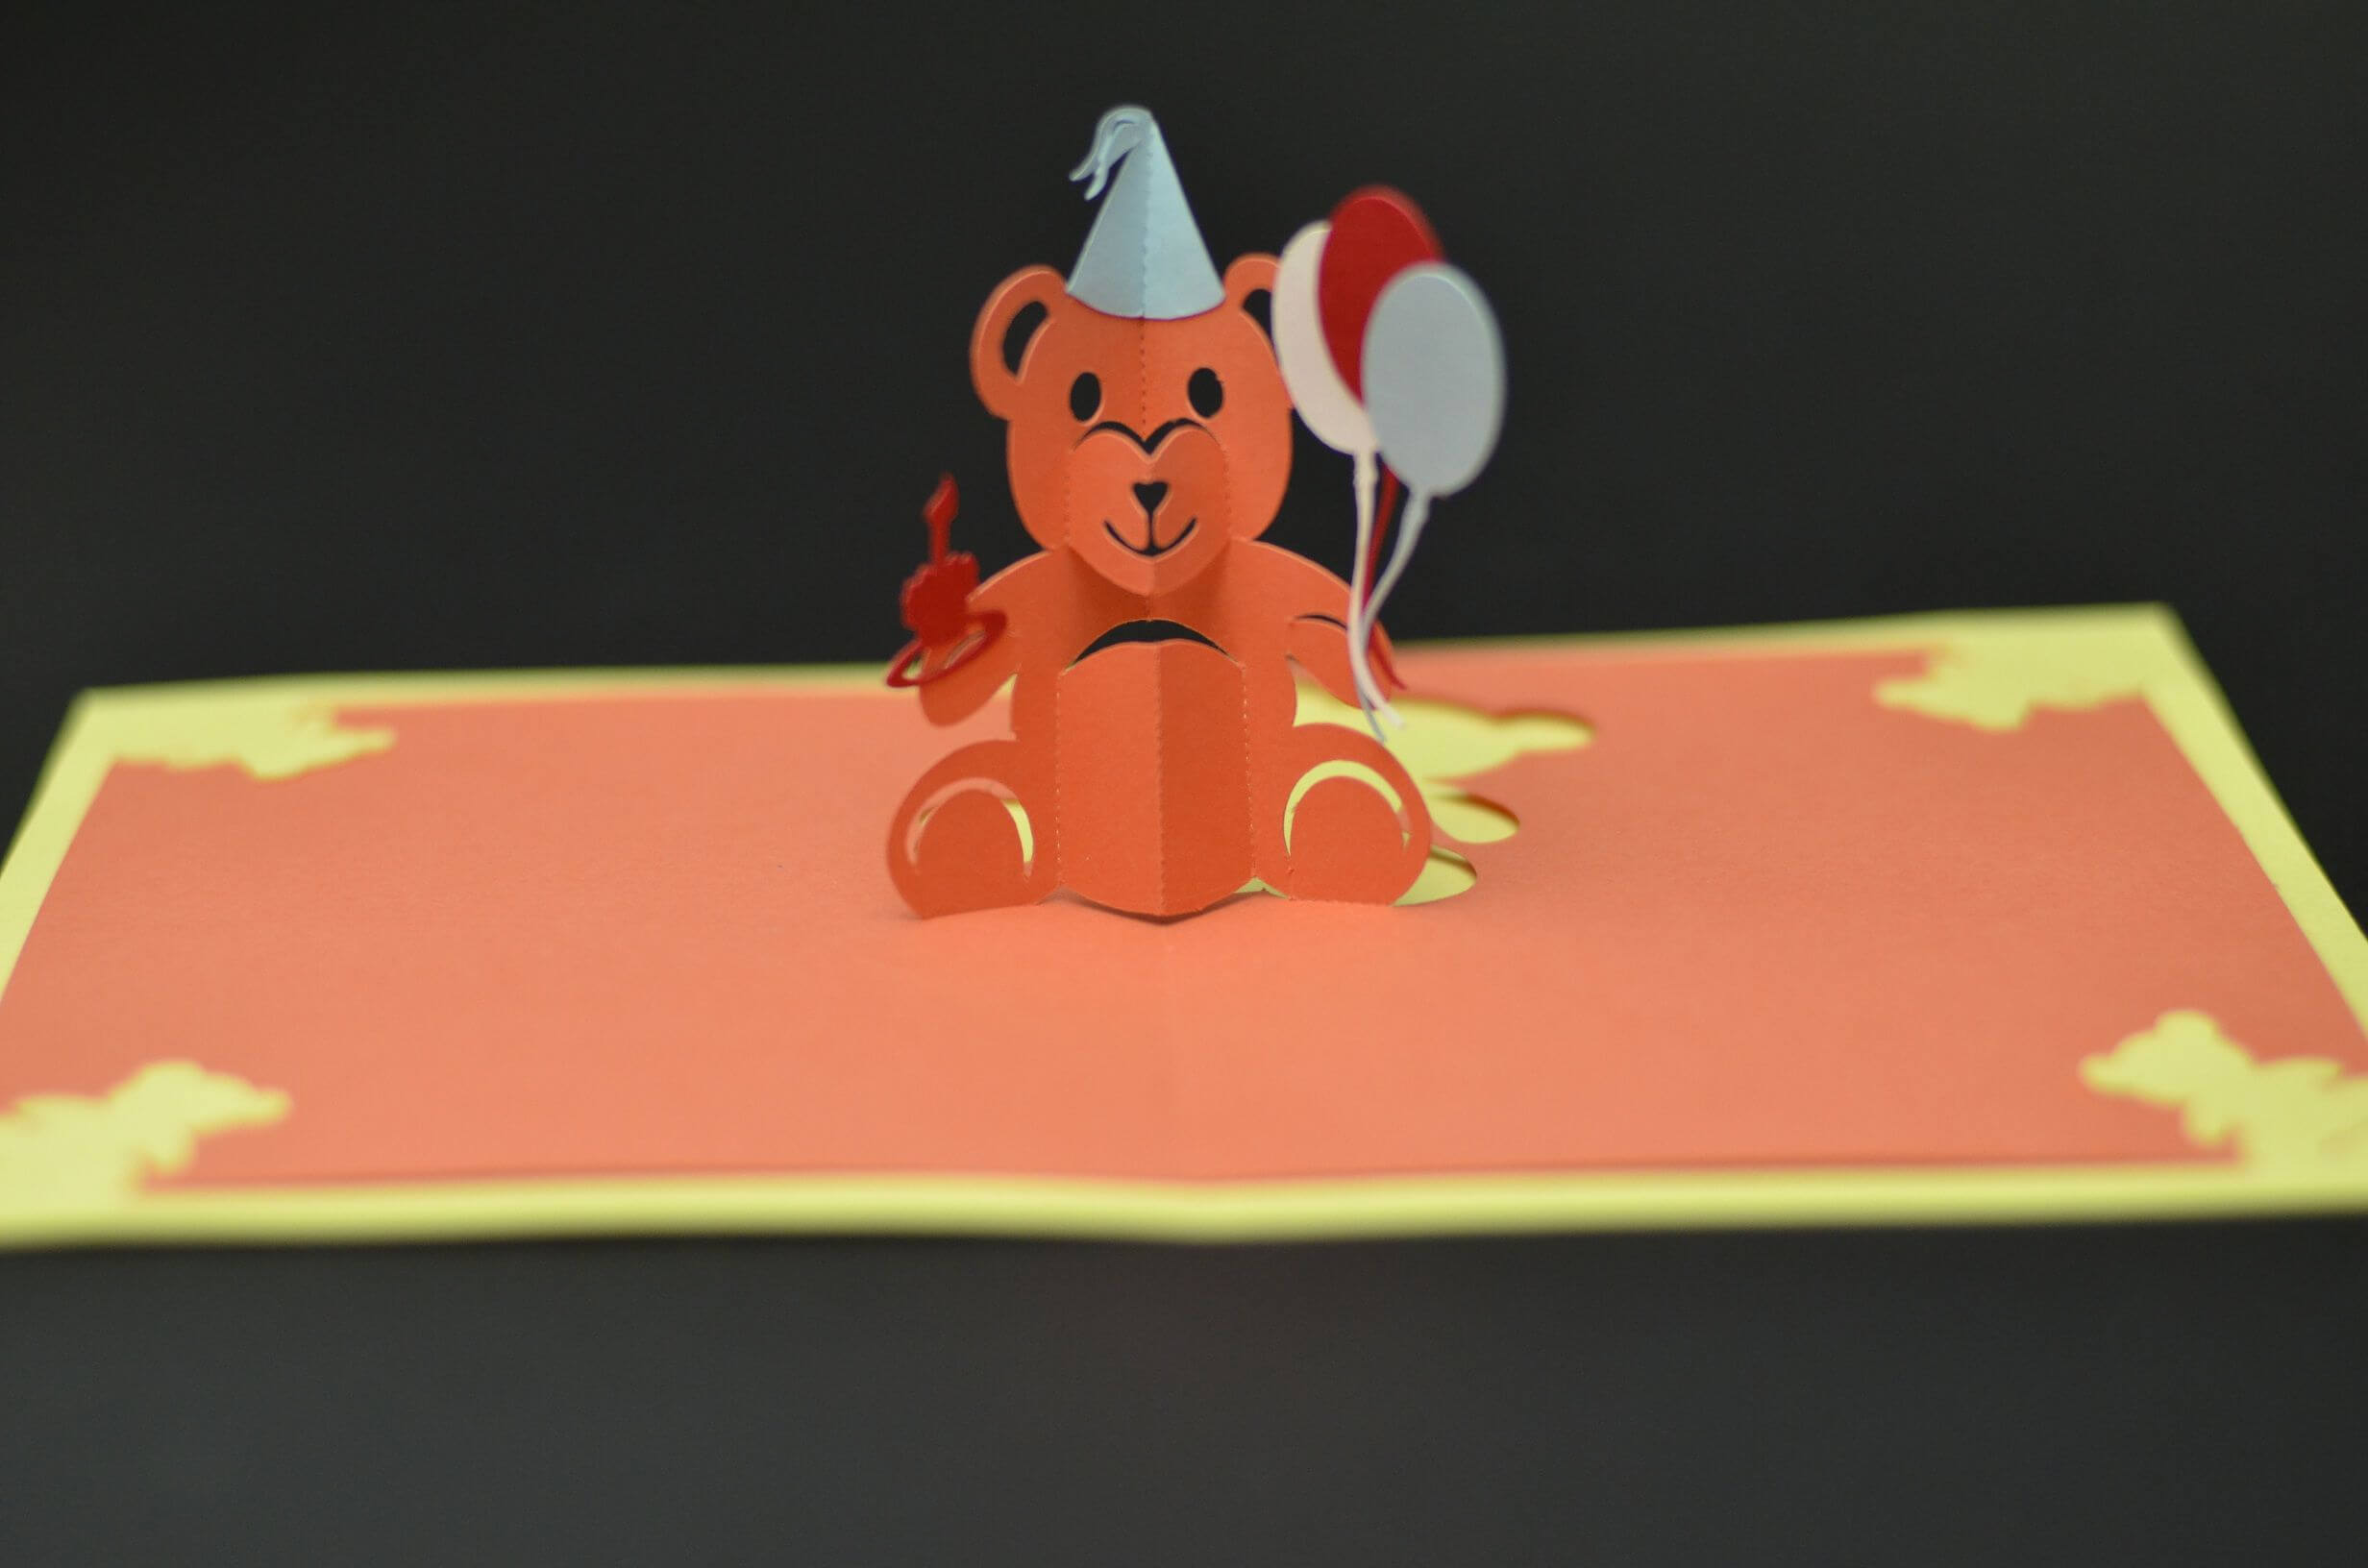 Teddy Bear Pop Up Card: Tutorial And Template | Pop Up Card Throughout Teddy Bear Pop Up Card Template Free